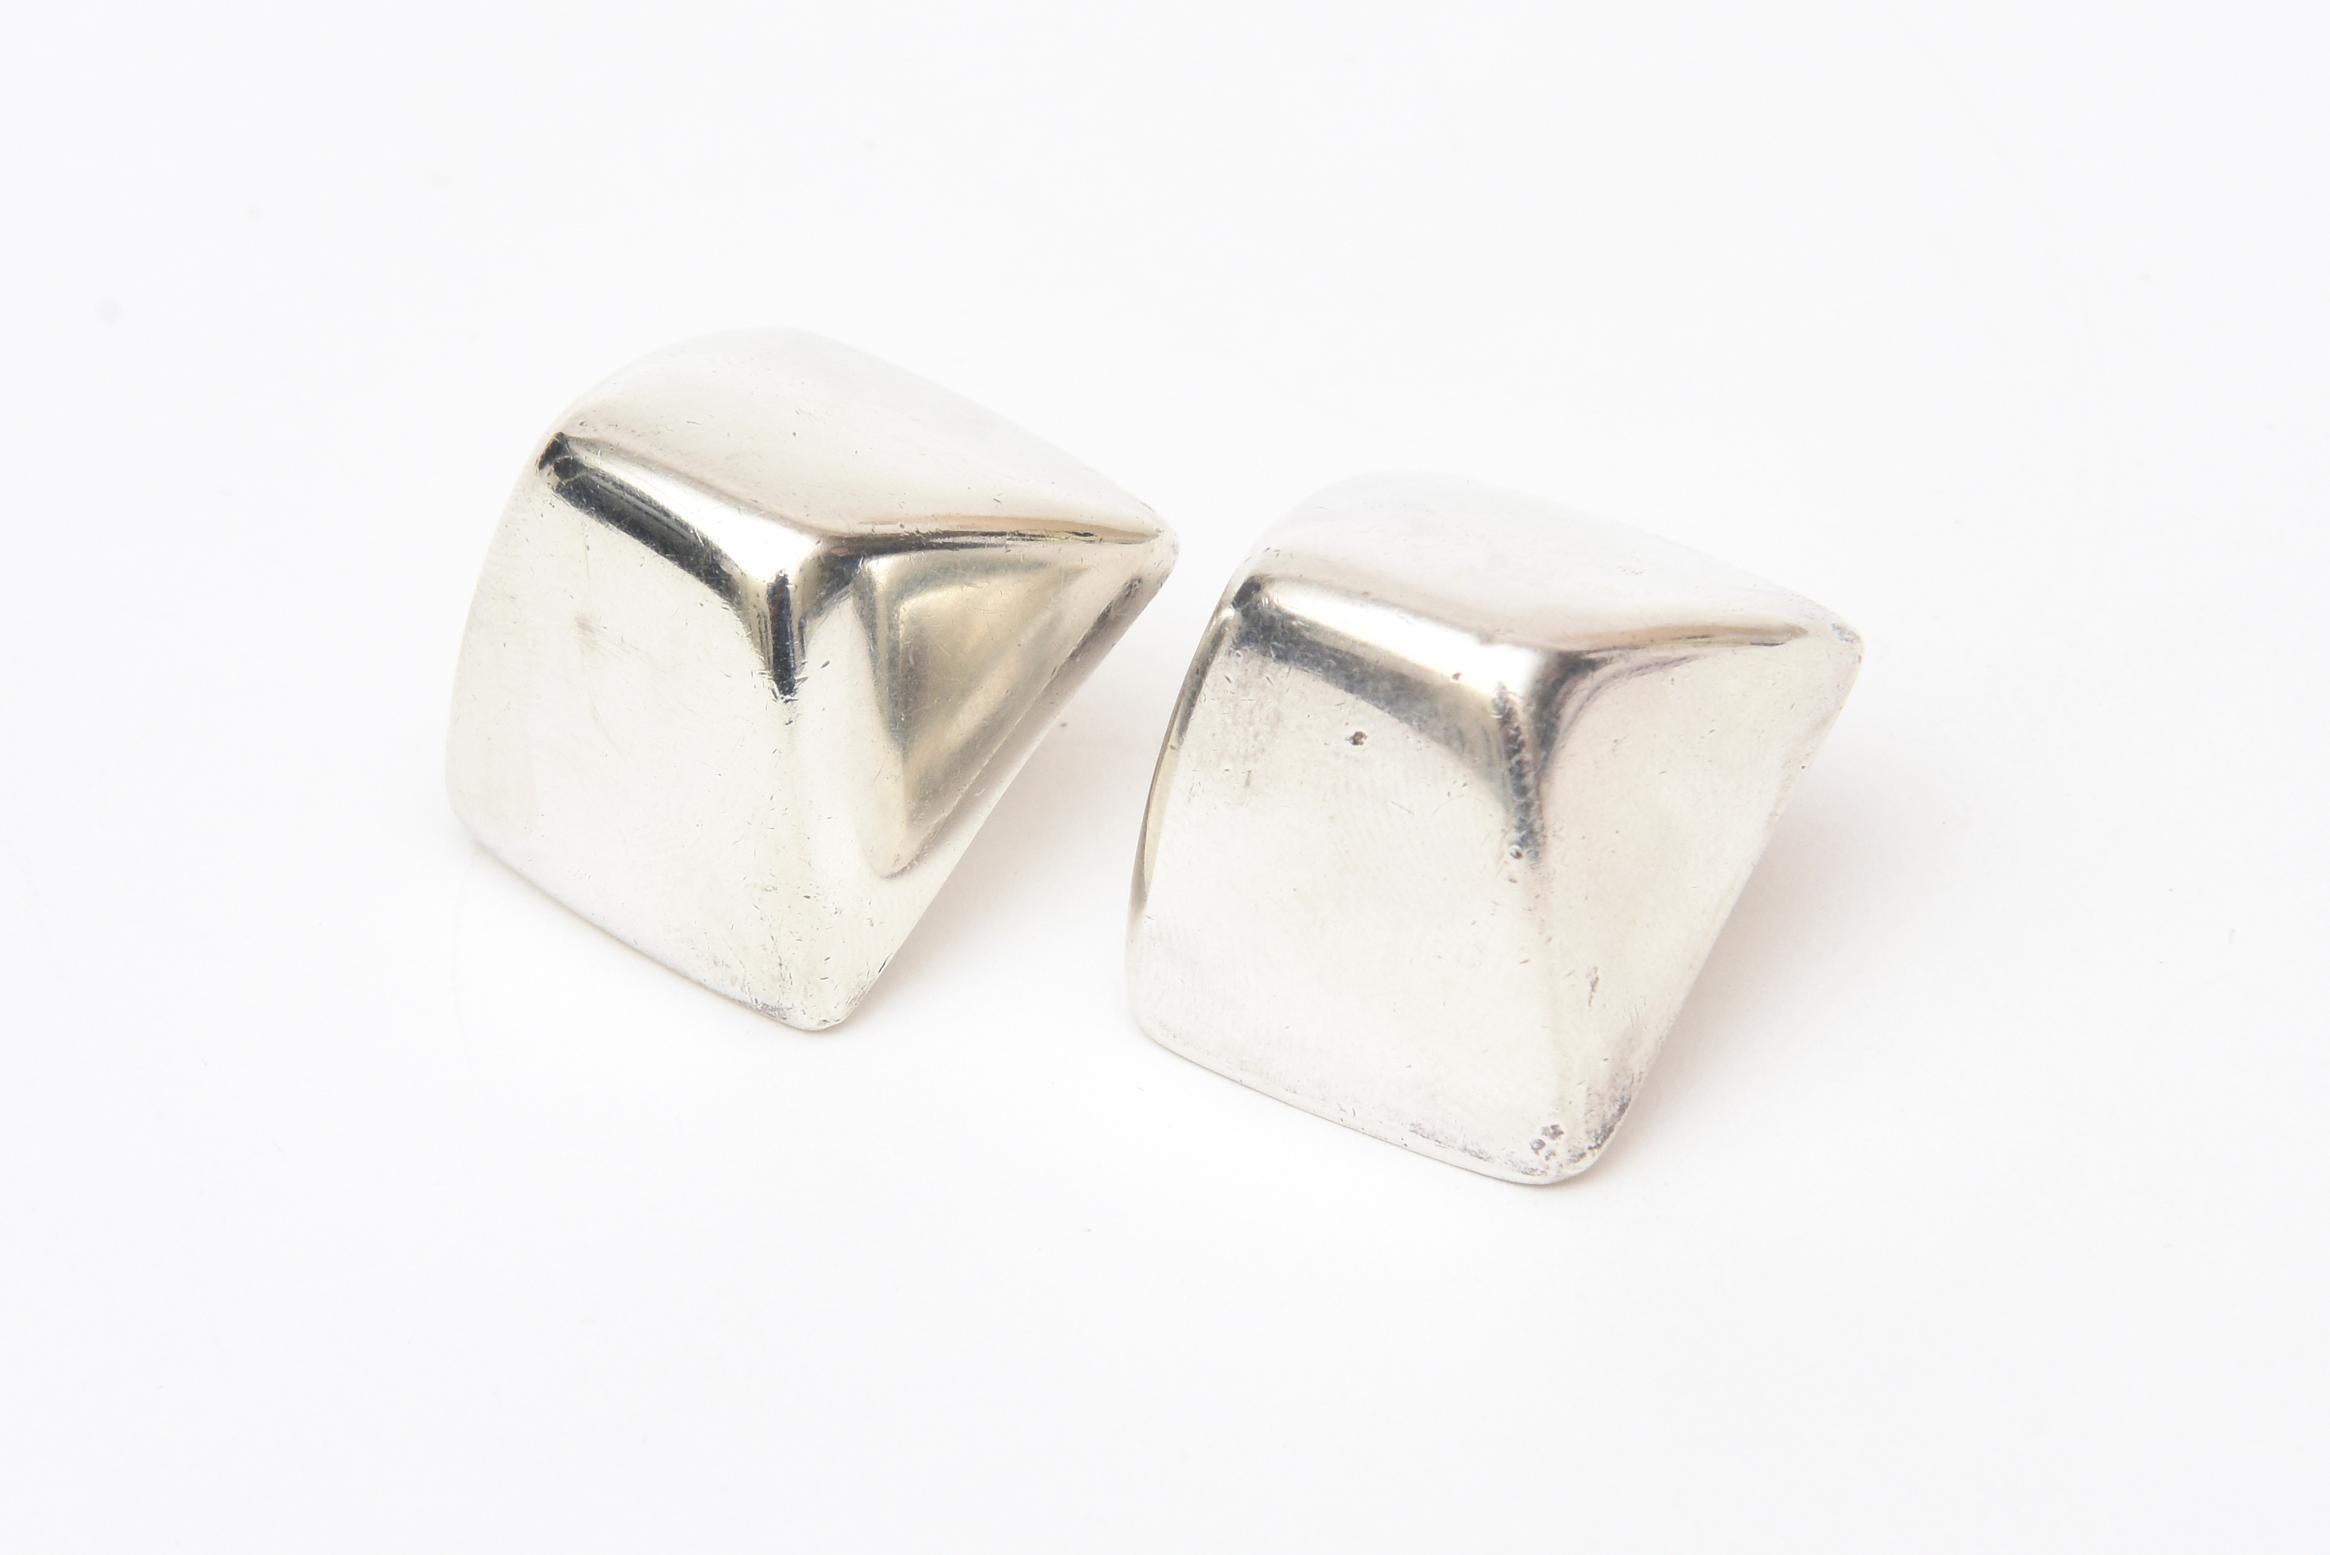 These sculptural sterling silver clip on earrings are from the 80's. They have light weight on the ear and dimension from the side. Tres chic!  They are 1